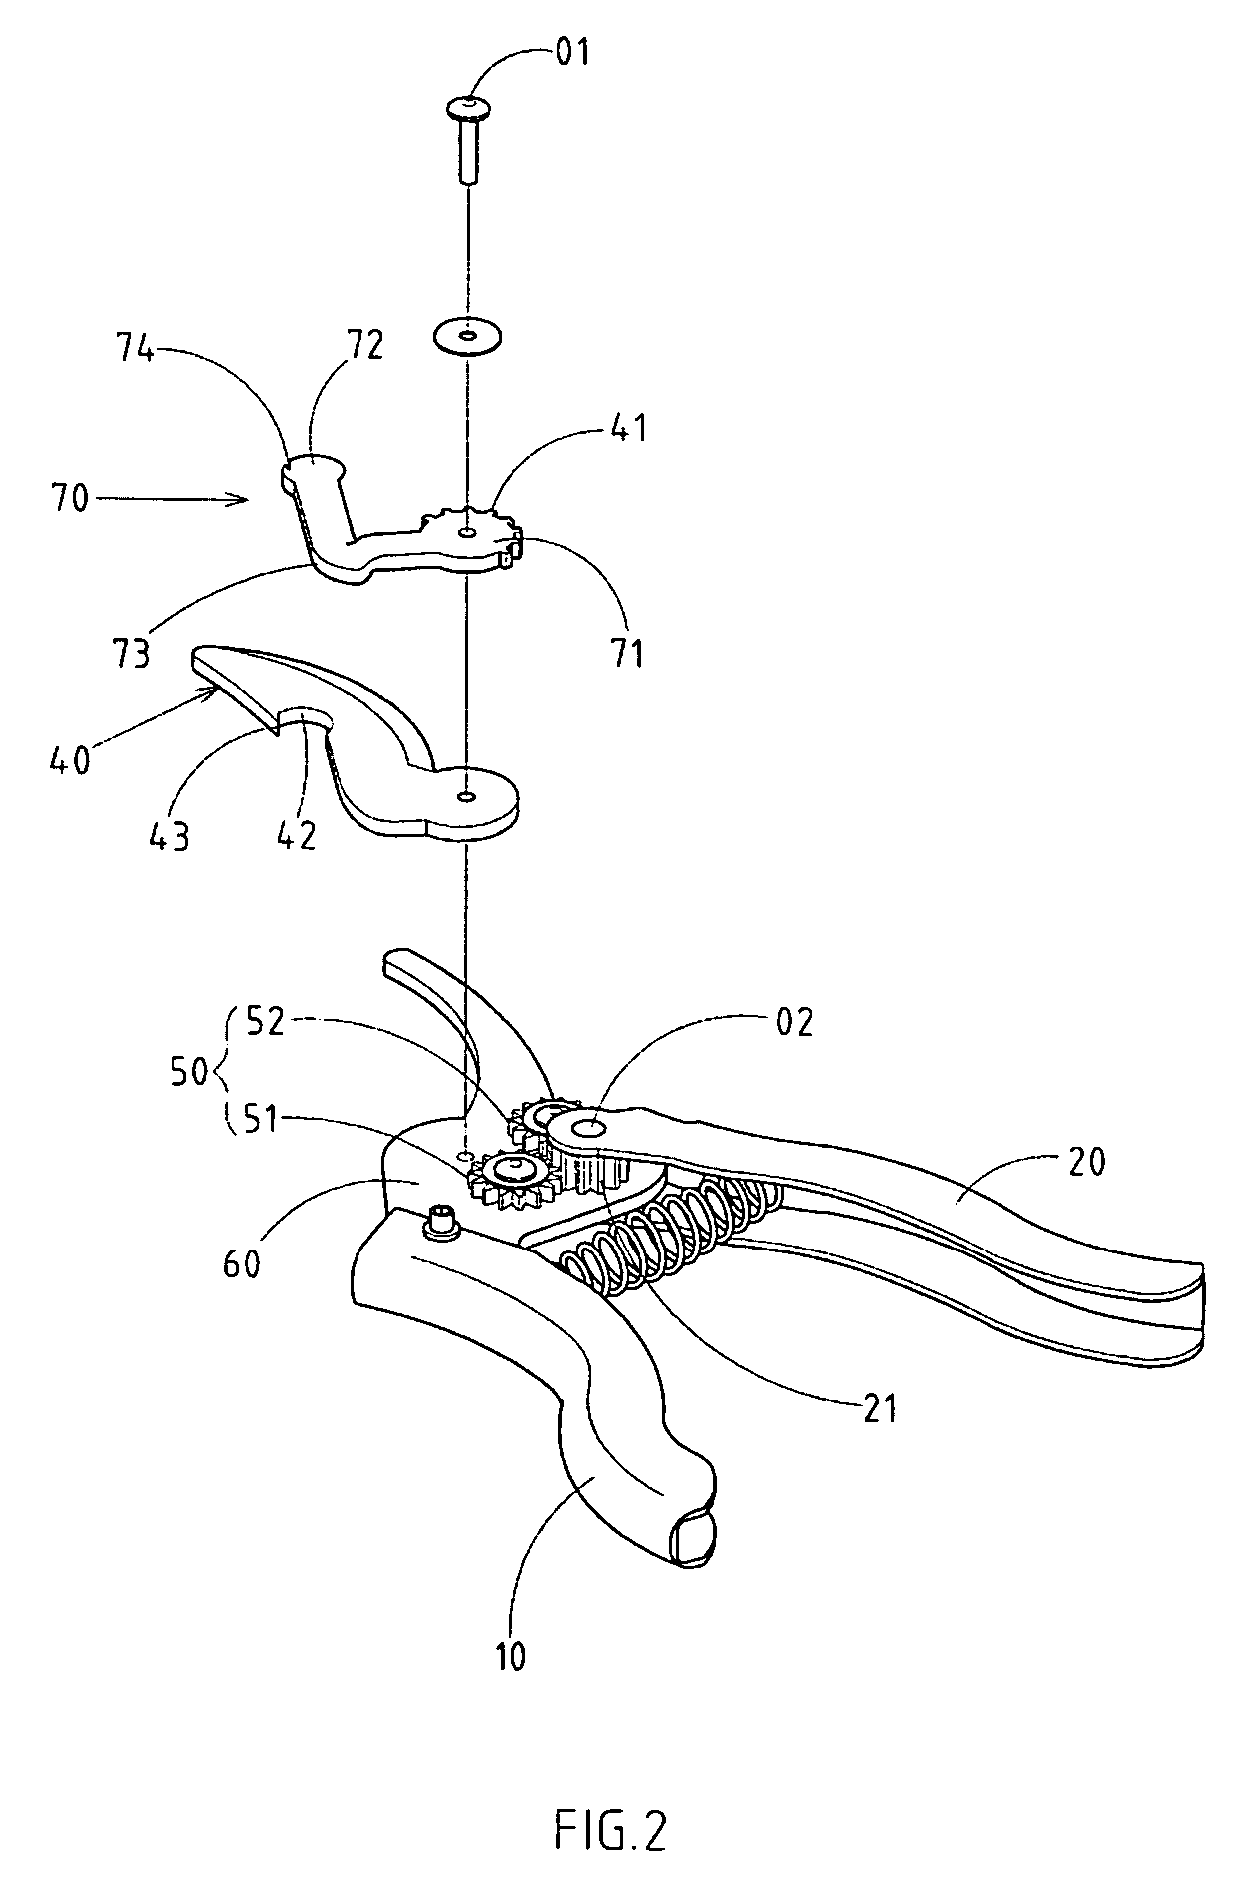 Gear-driven shears provided with a curved plate a movable jaw